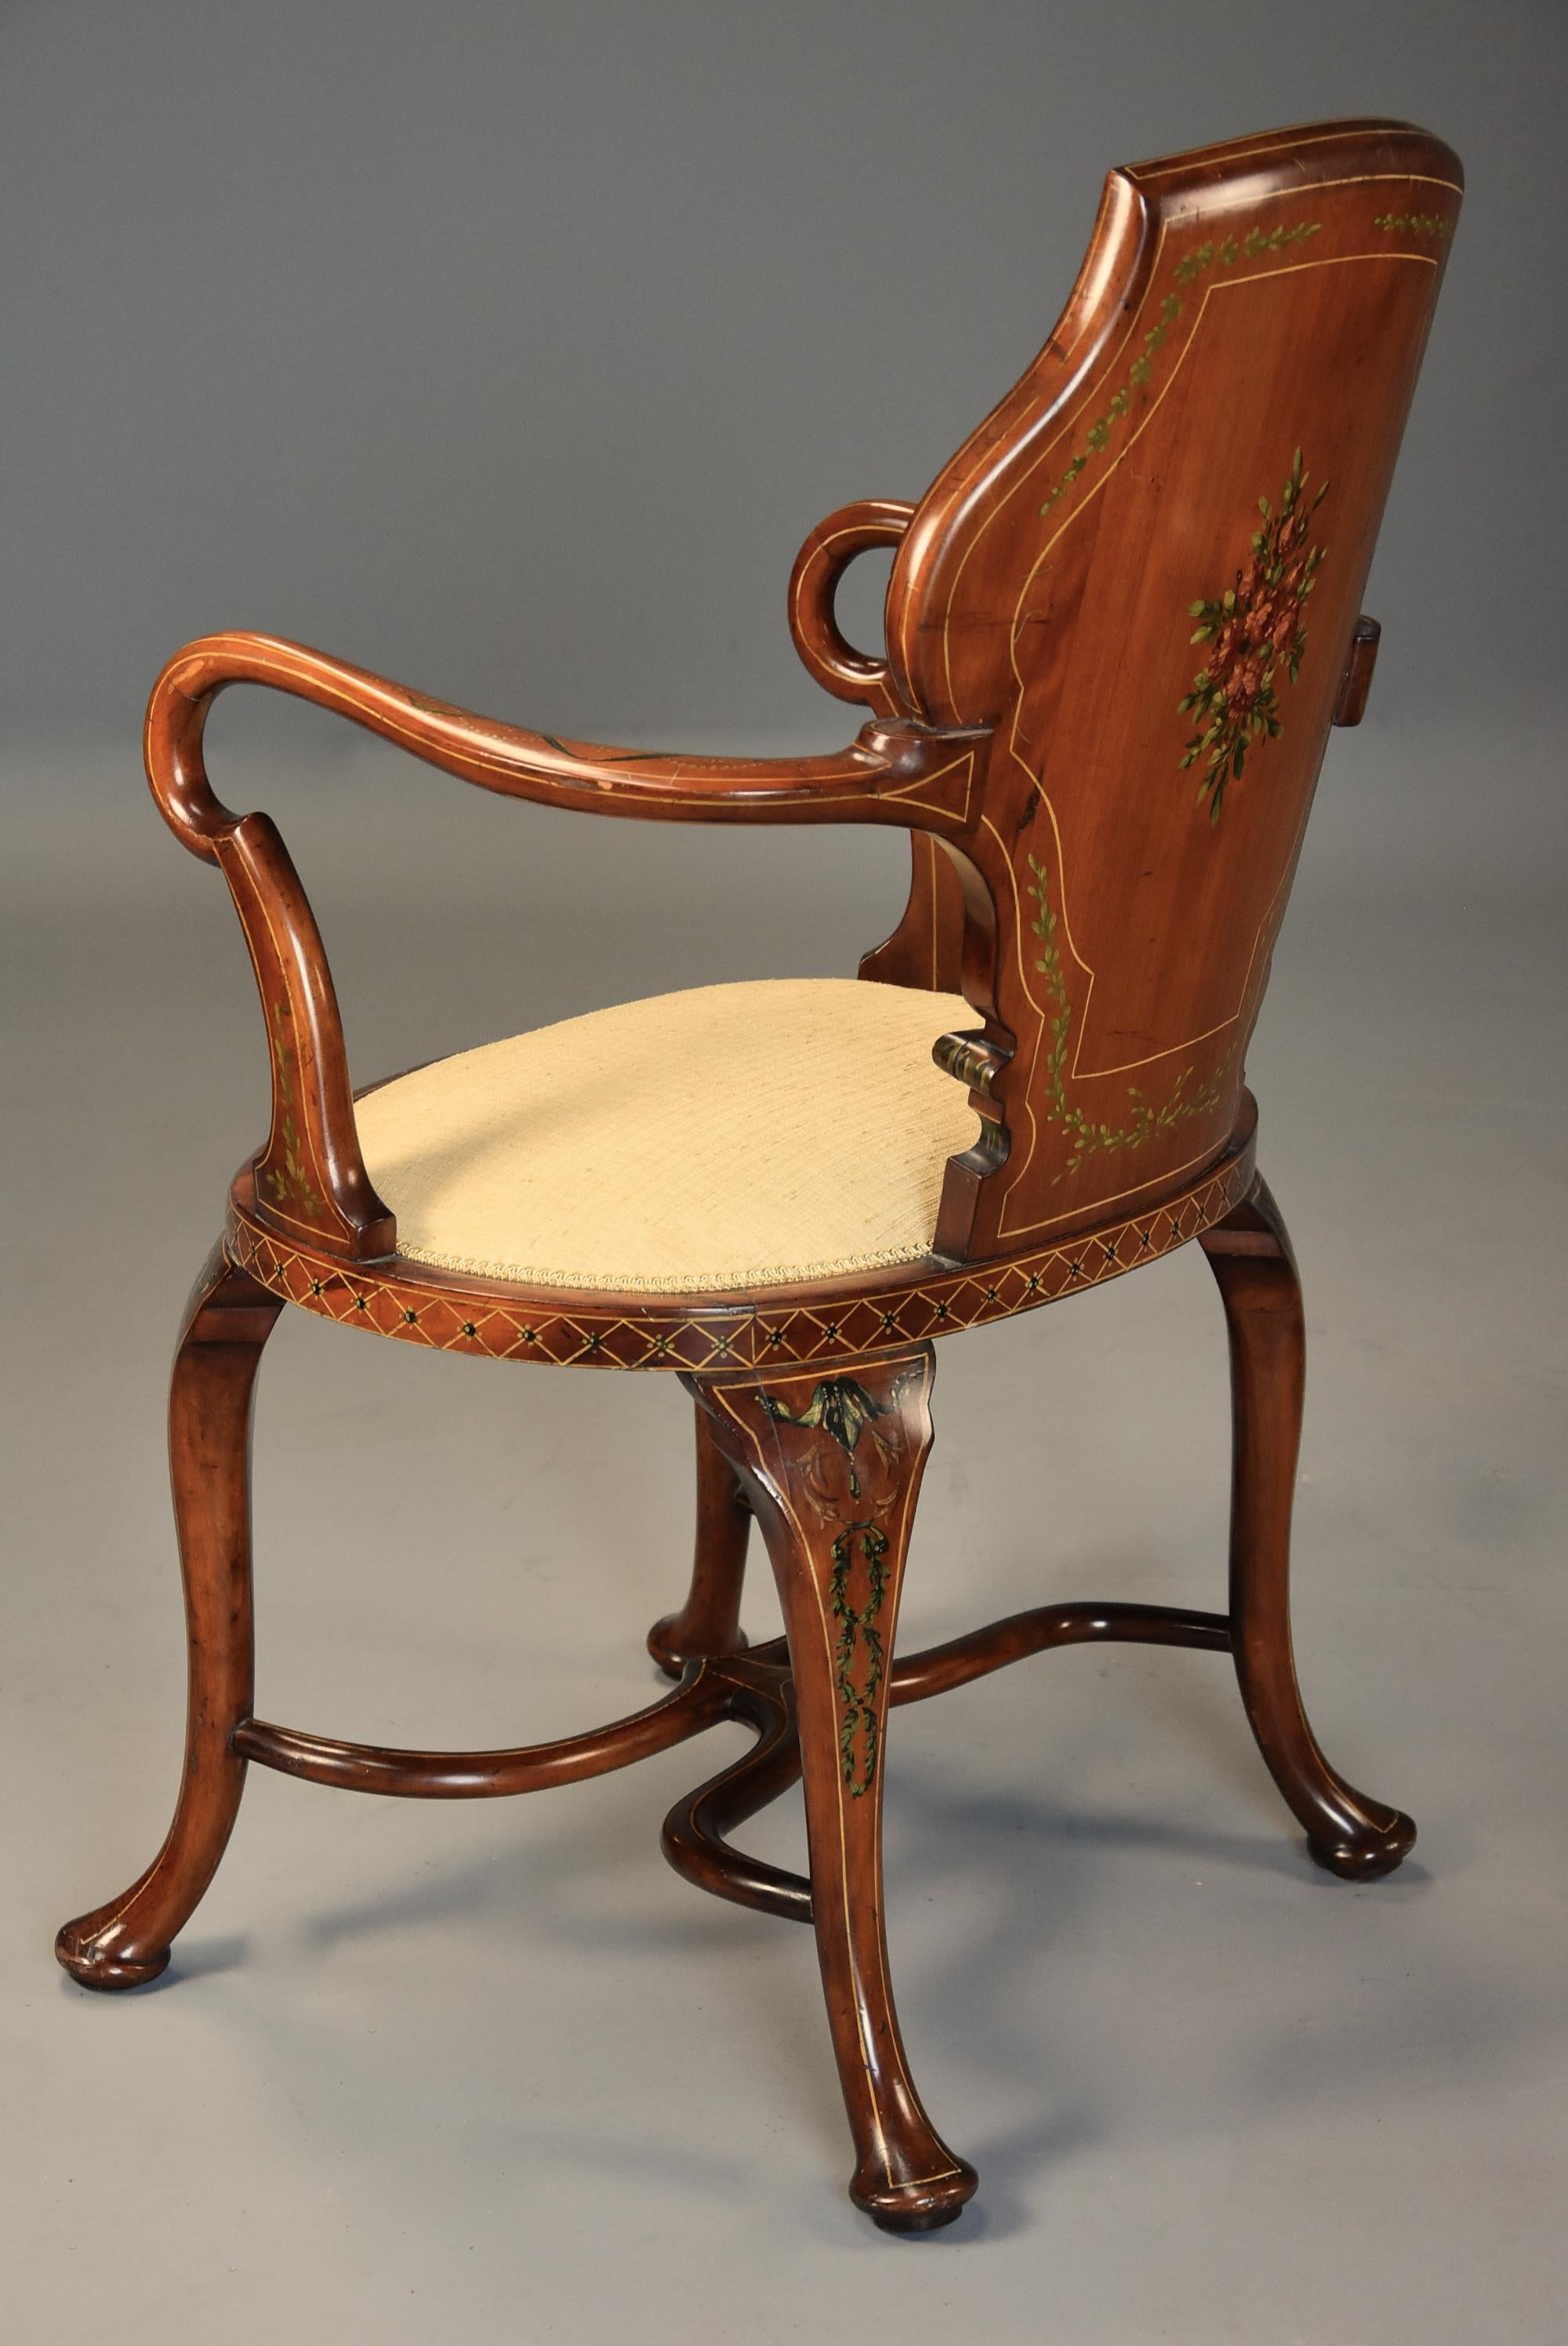 Highly Decorative Edwardian Satinwood and Painted Armchair in the Georgian Style im Angebot 1